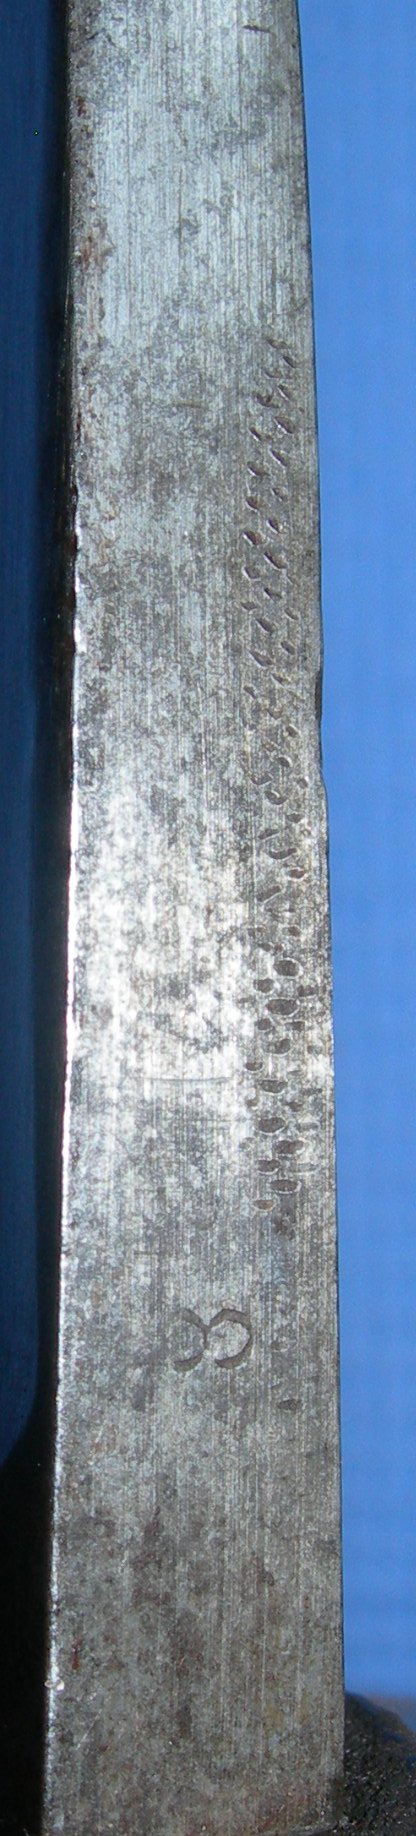 Blade spine showing 8 and bending